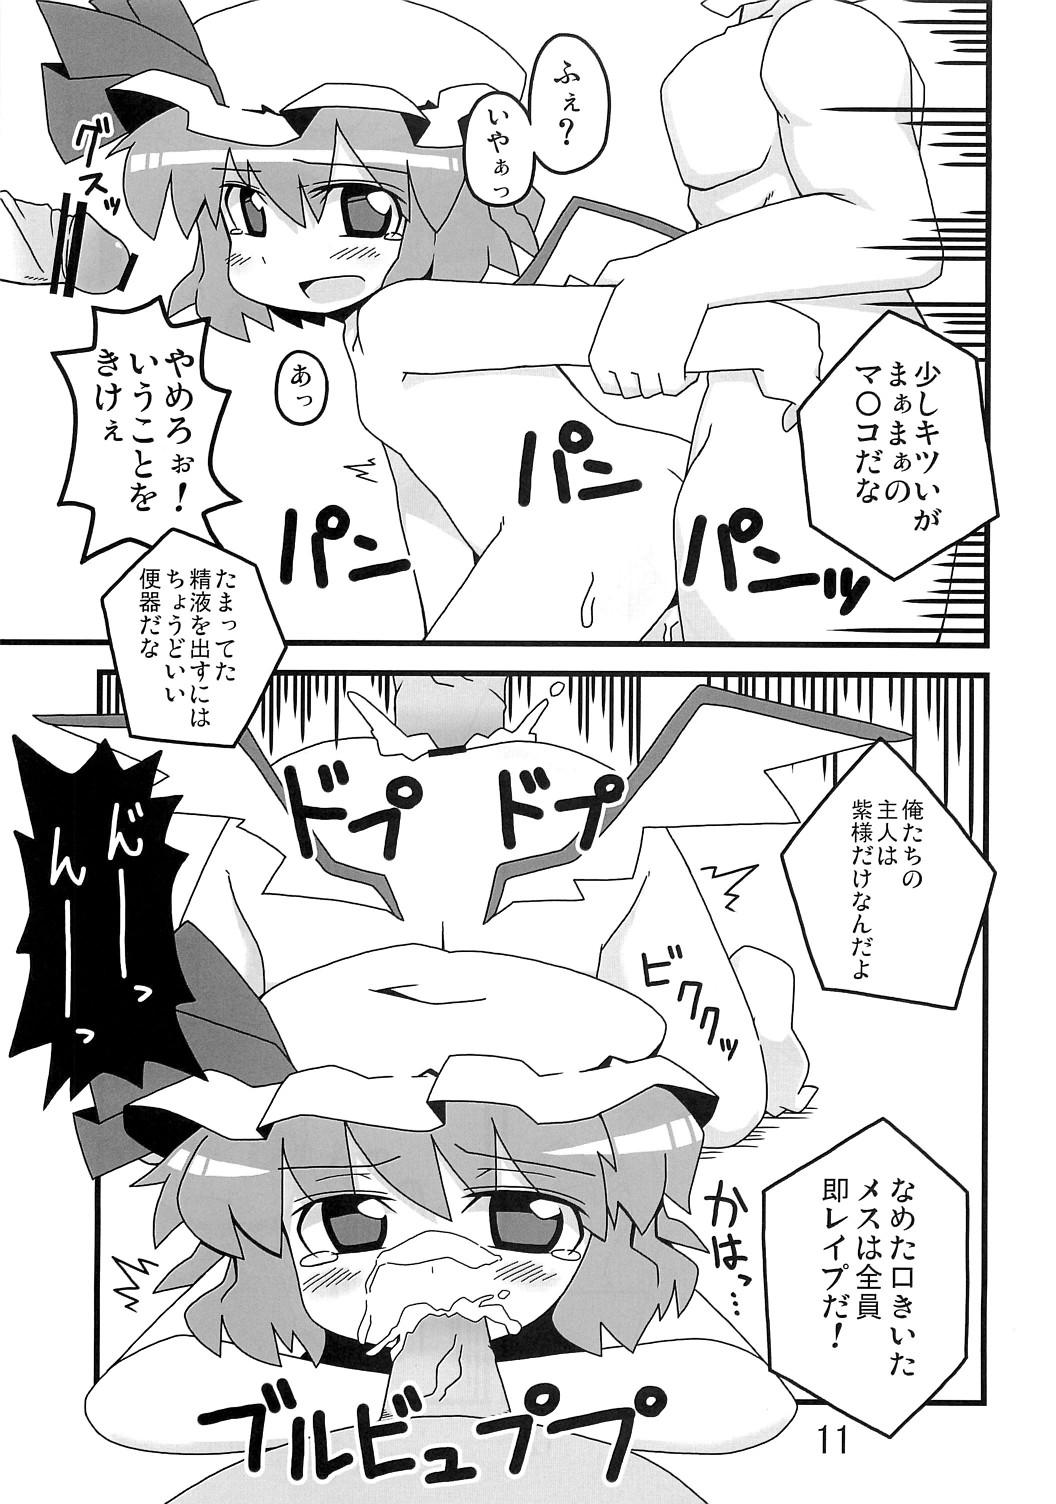 Game 東方豊年祭 - Touhou project Naija - Page 10